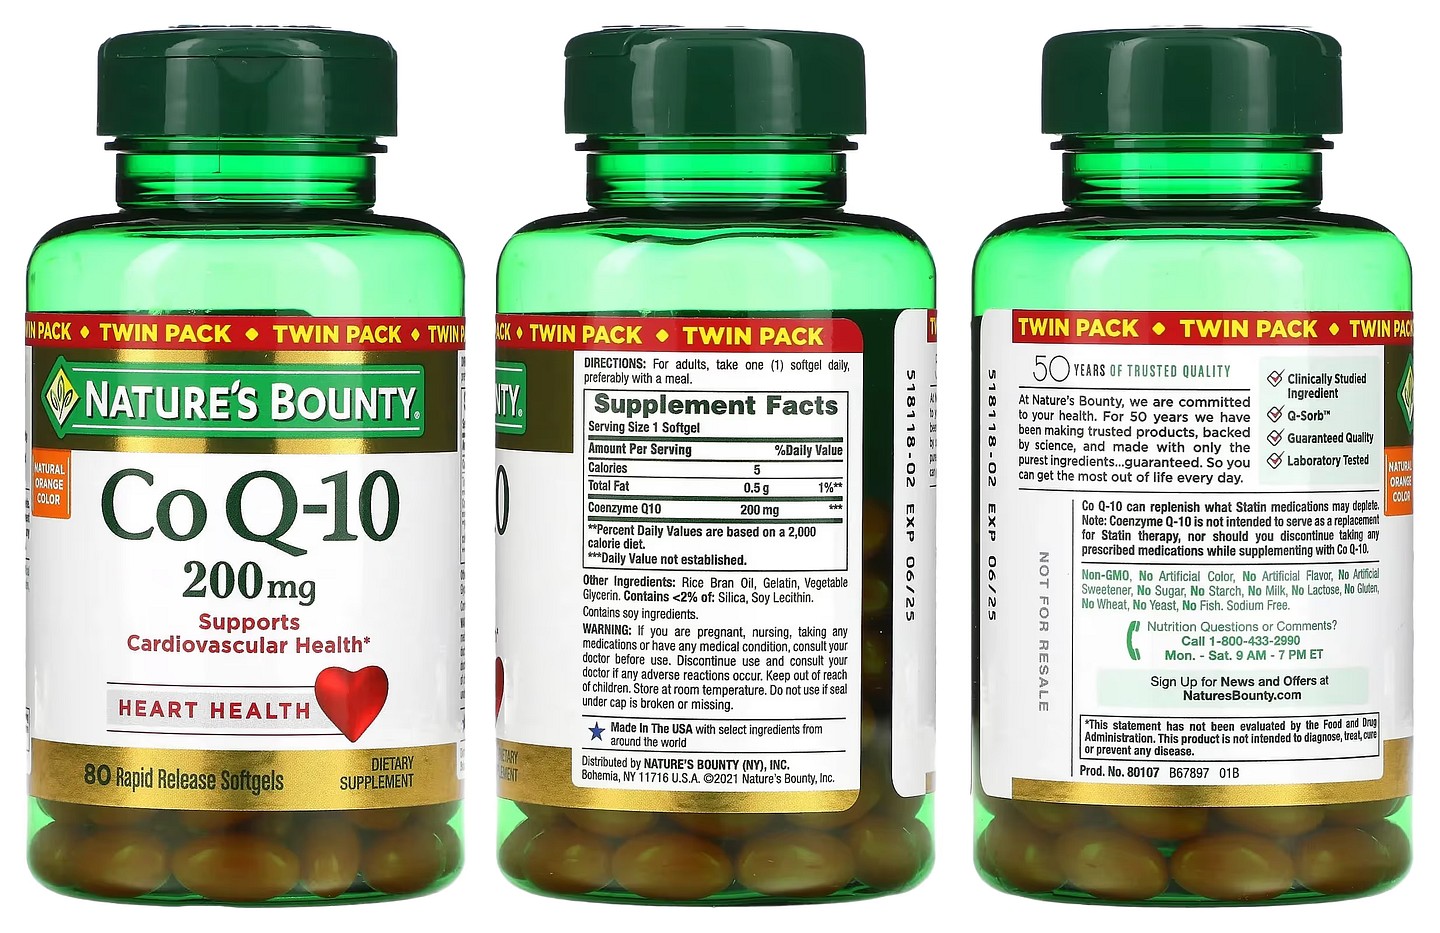 Nature's Bounty, Co Q-10 packaging